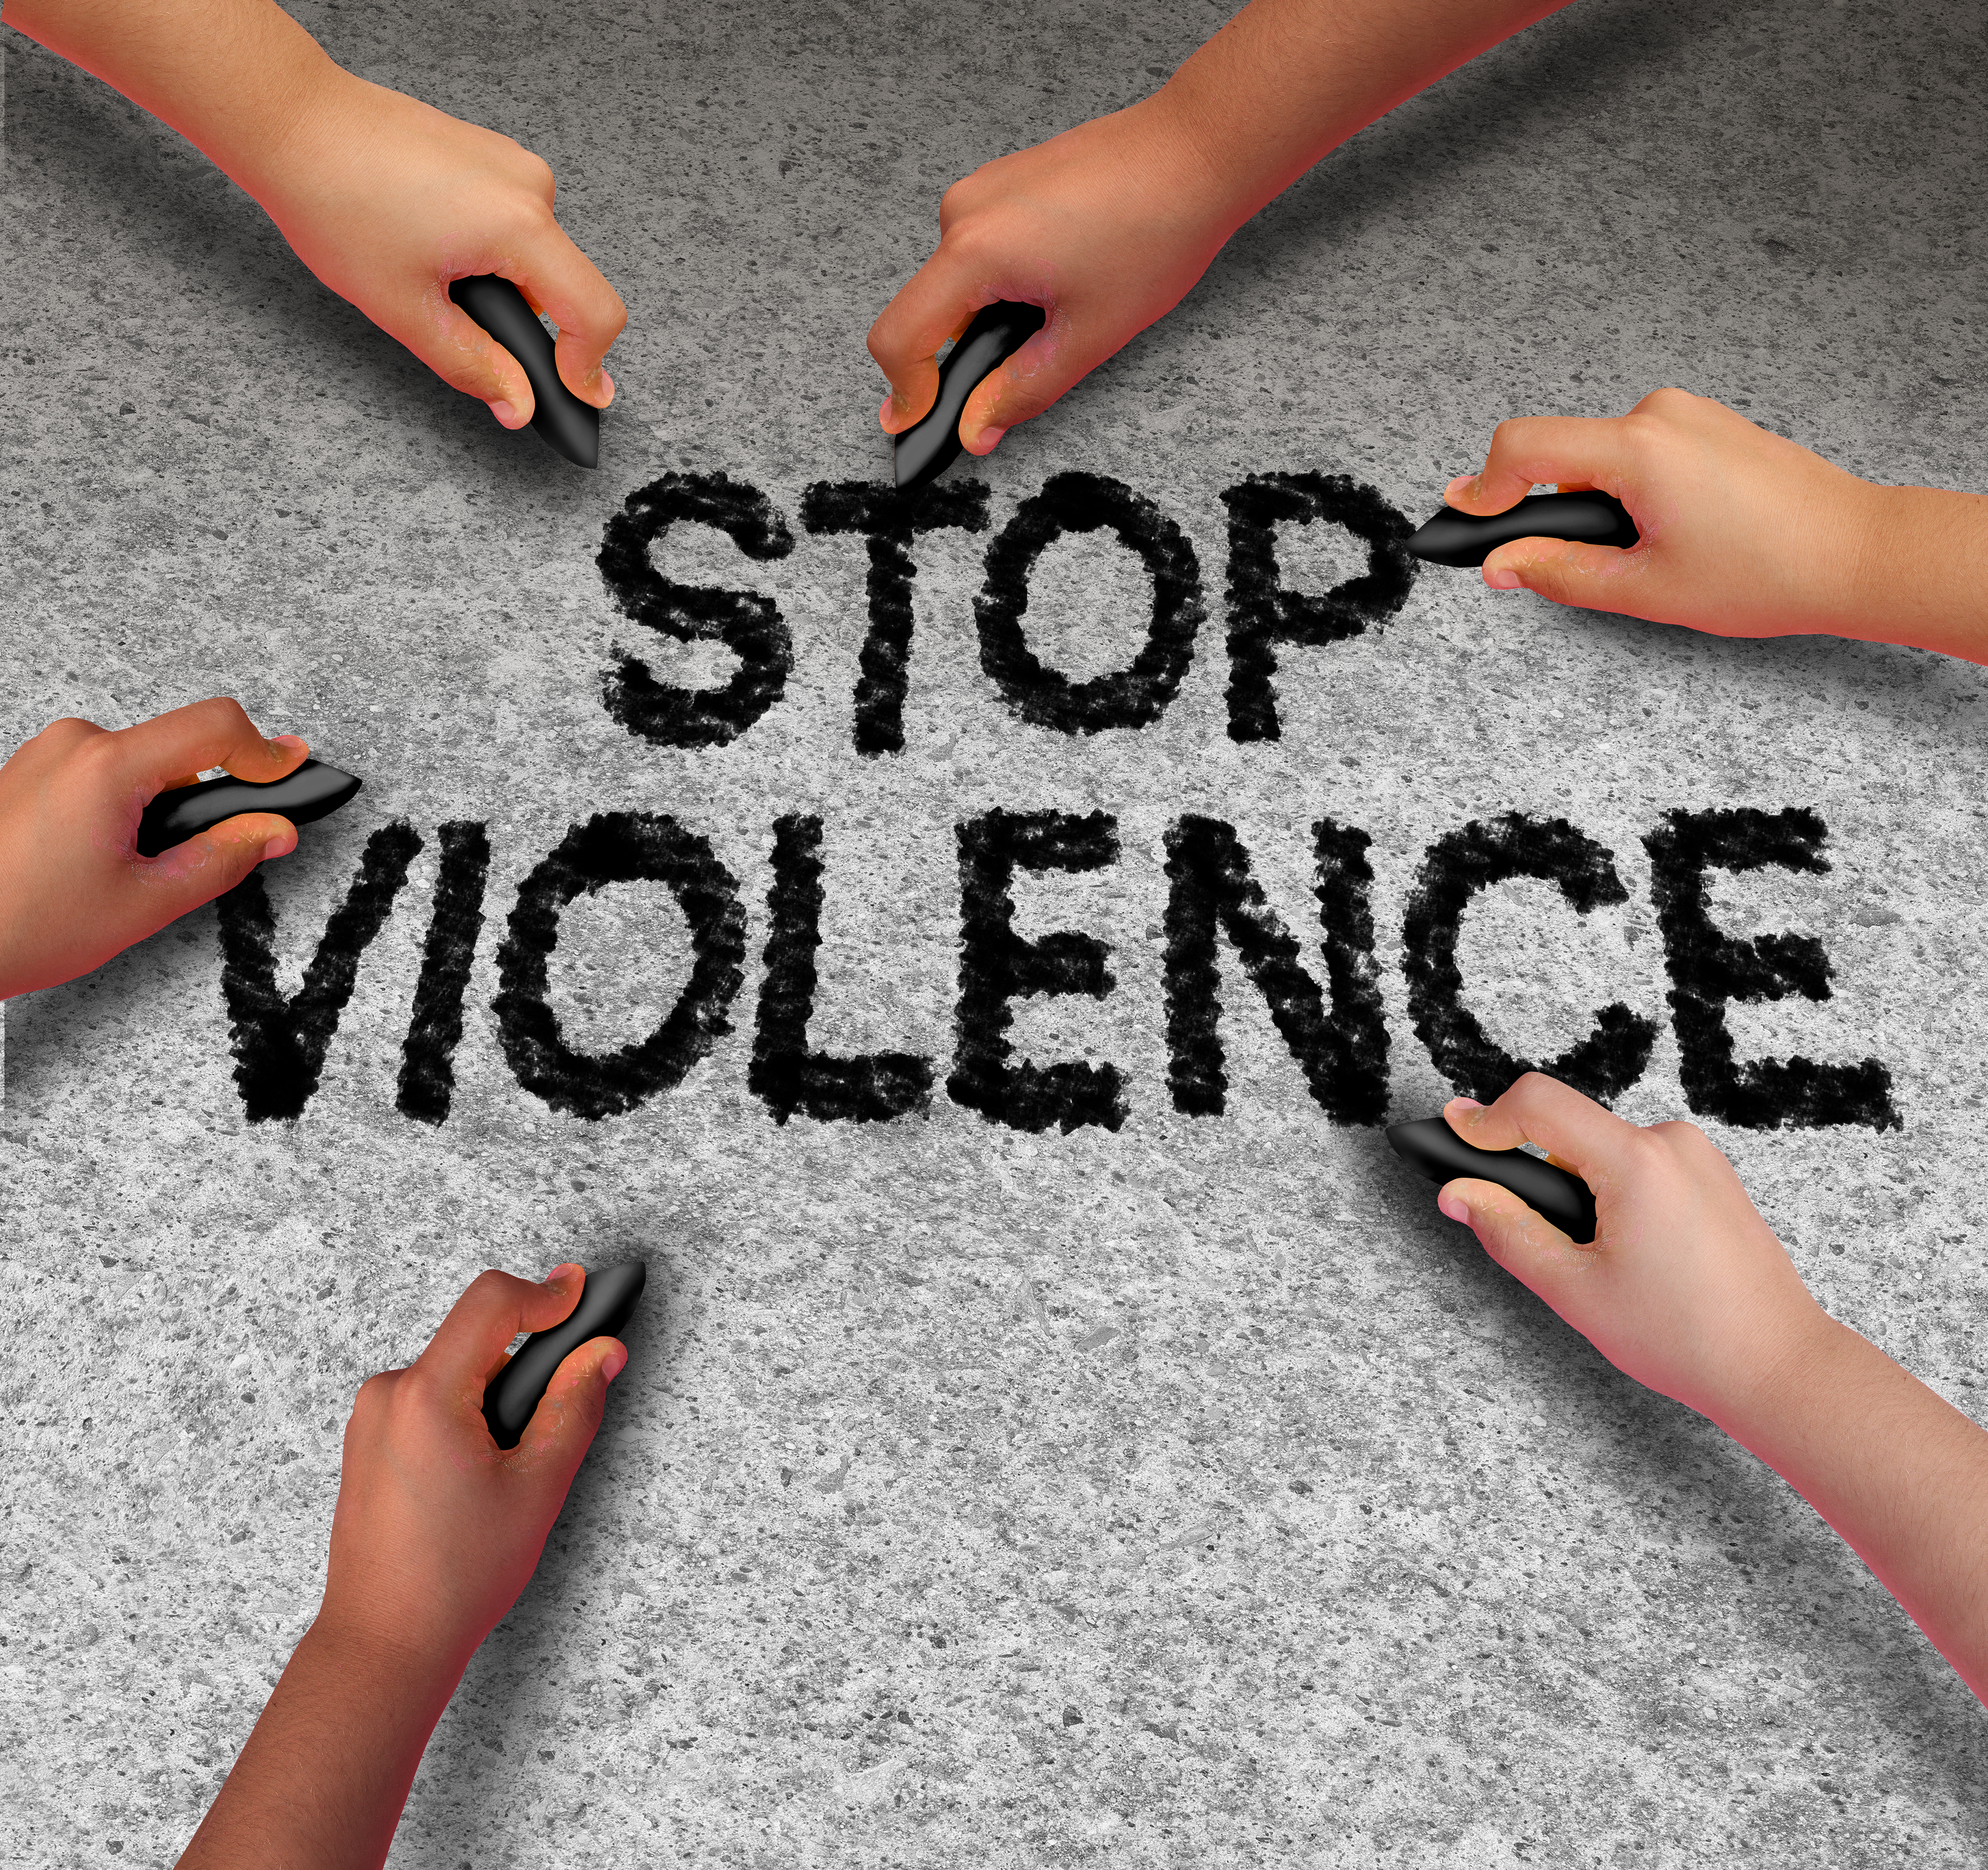 None in Three - Preventing gender-based violence